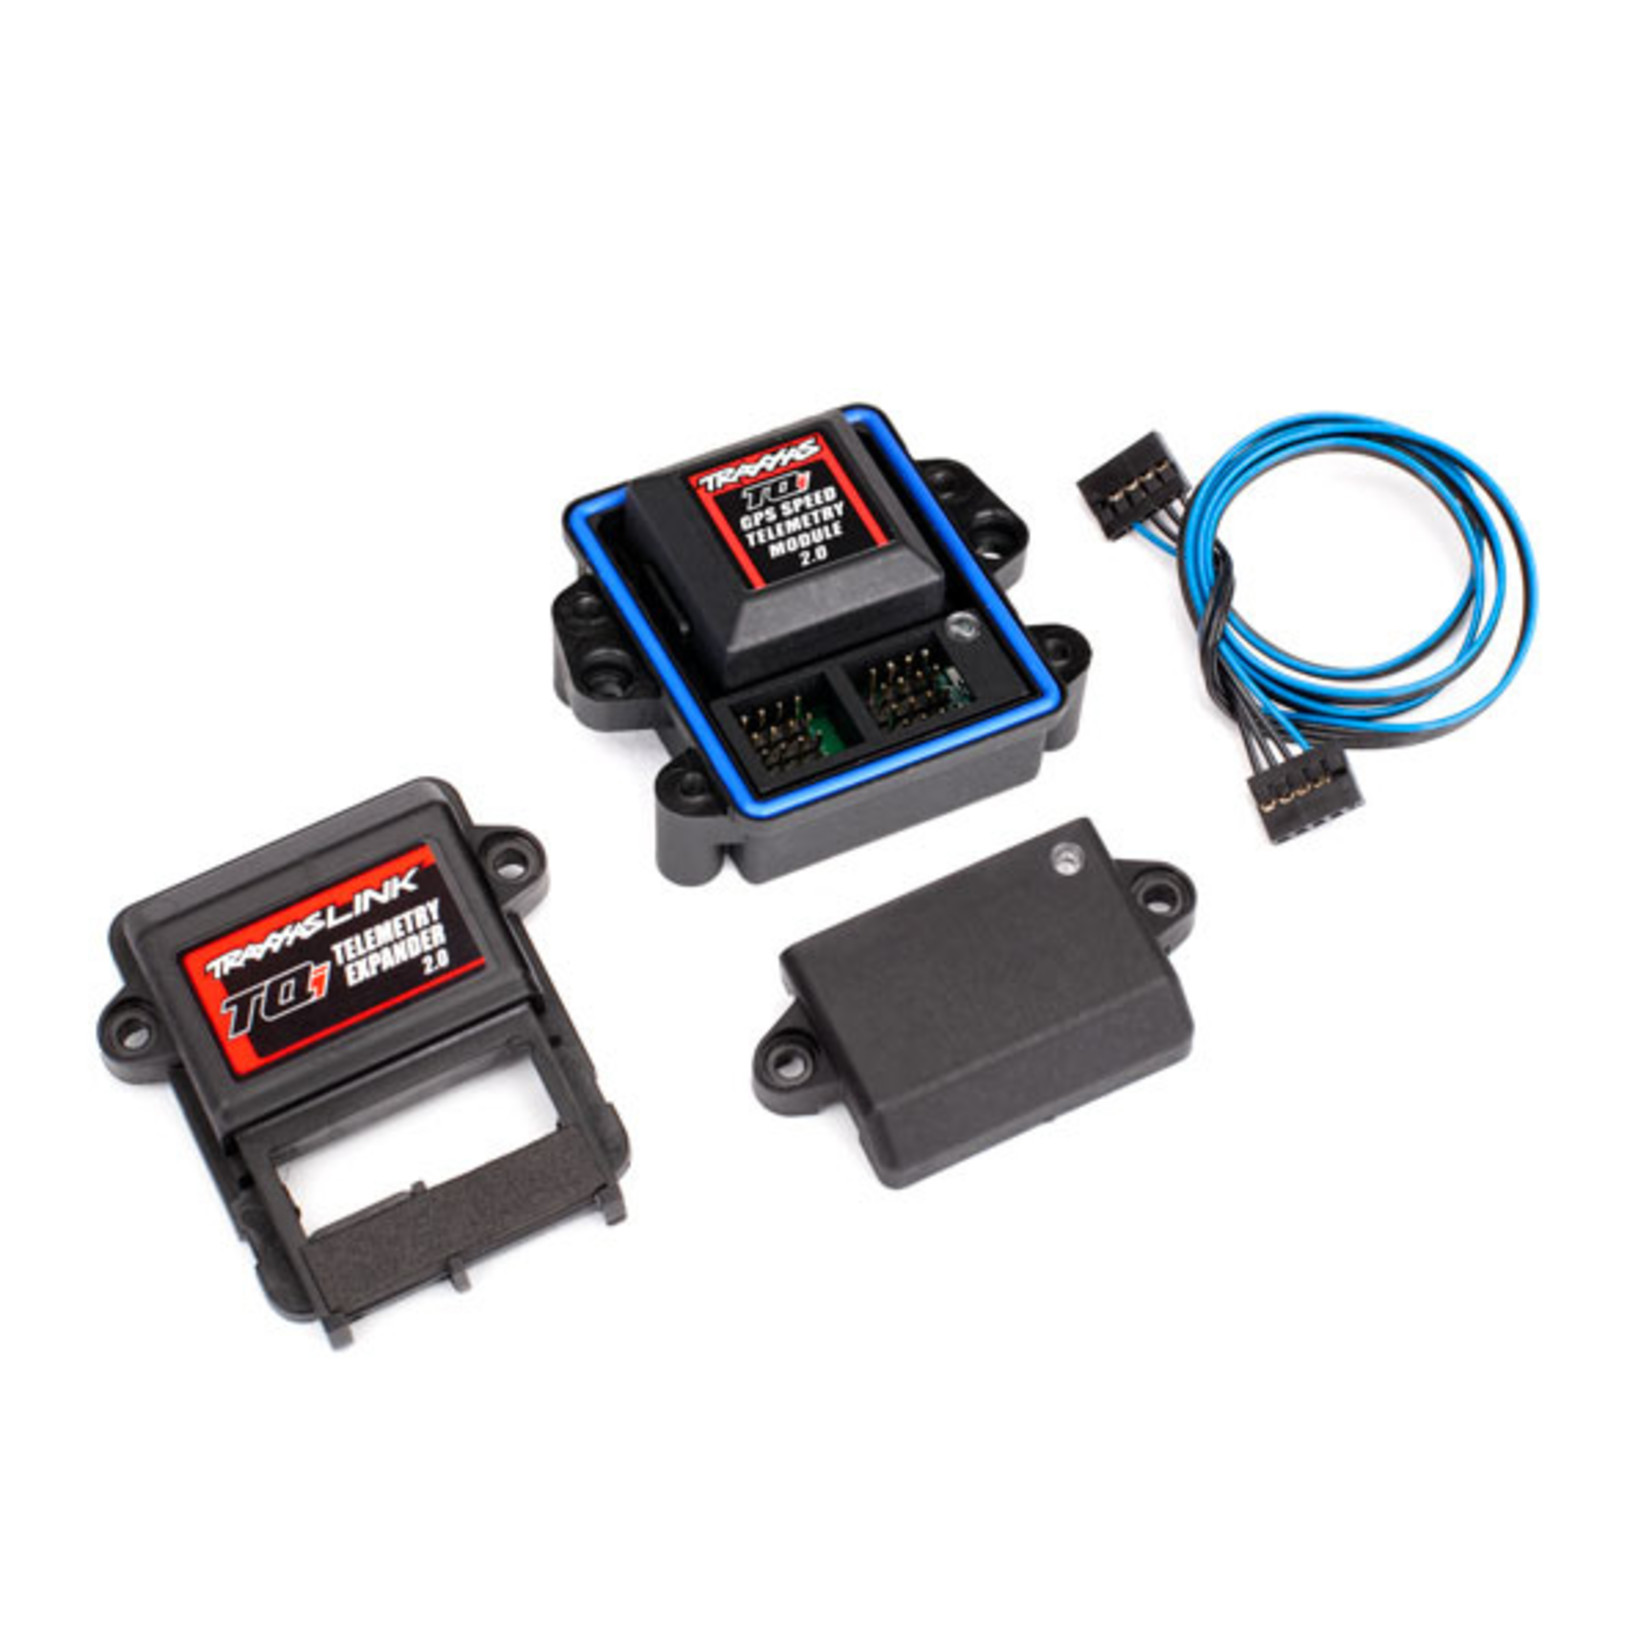 Traxxas 6553X - Telemetry Expander 2.0 and GPS module 2.0,